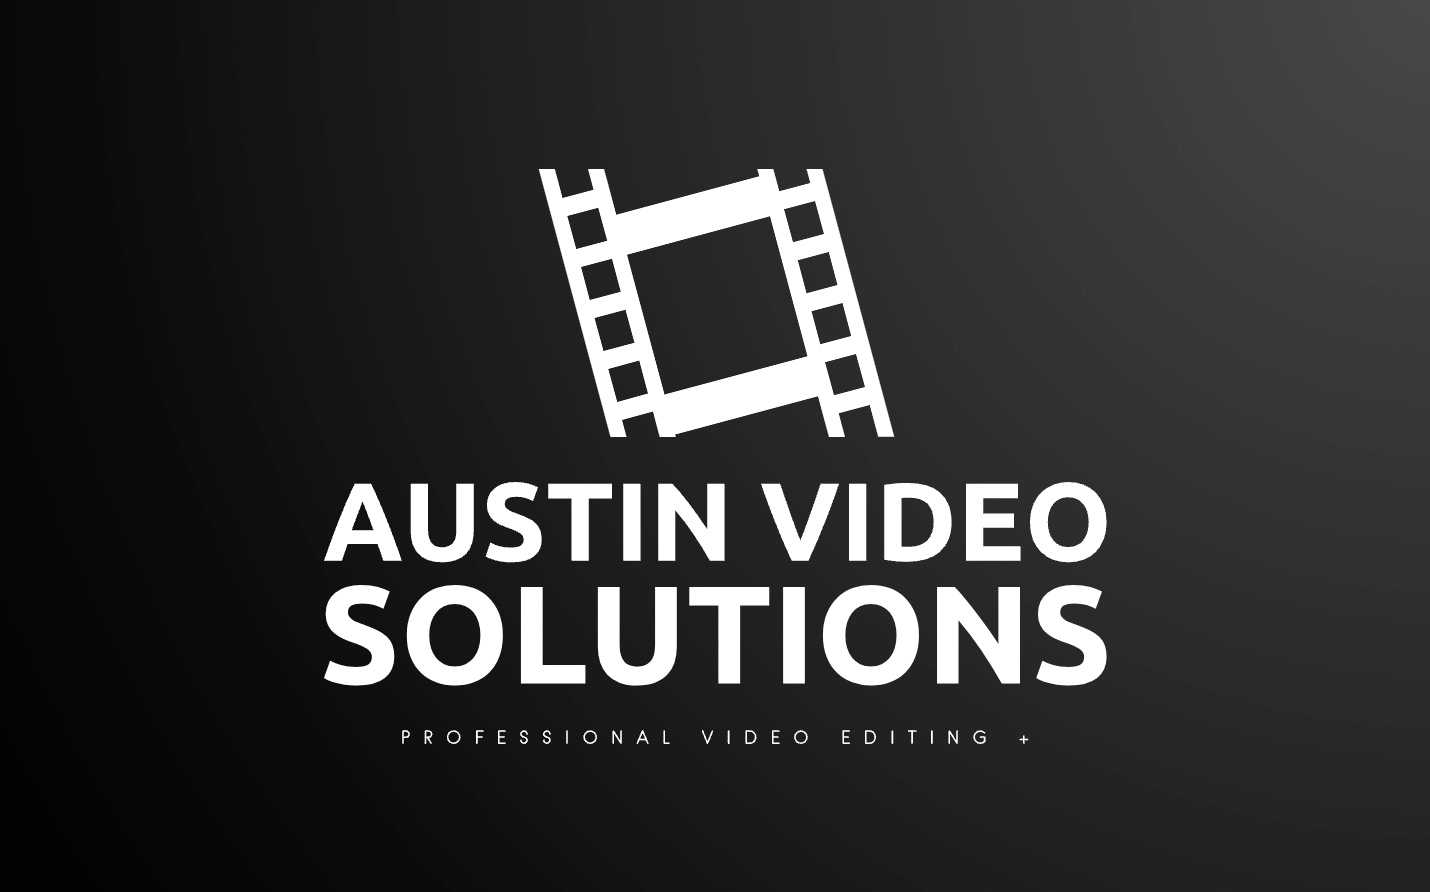 Austin Video Solutions Austin Video Solutions offers professional video editing and VHS to DVD transfers in Austin Texas.